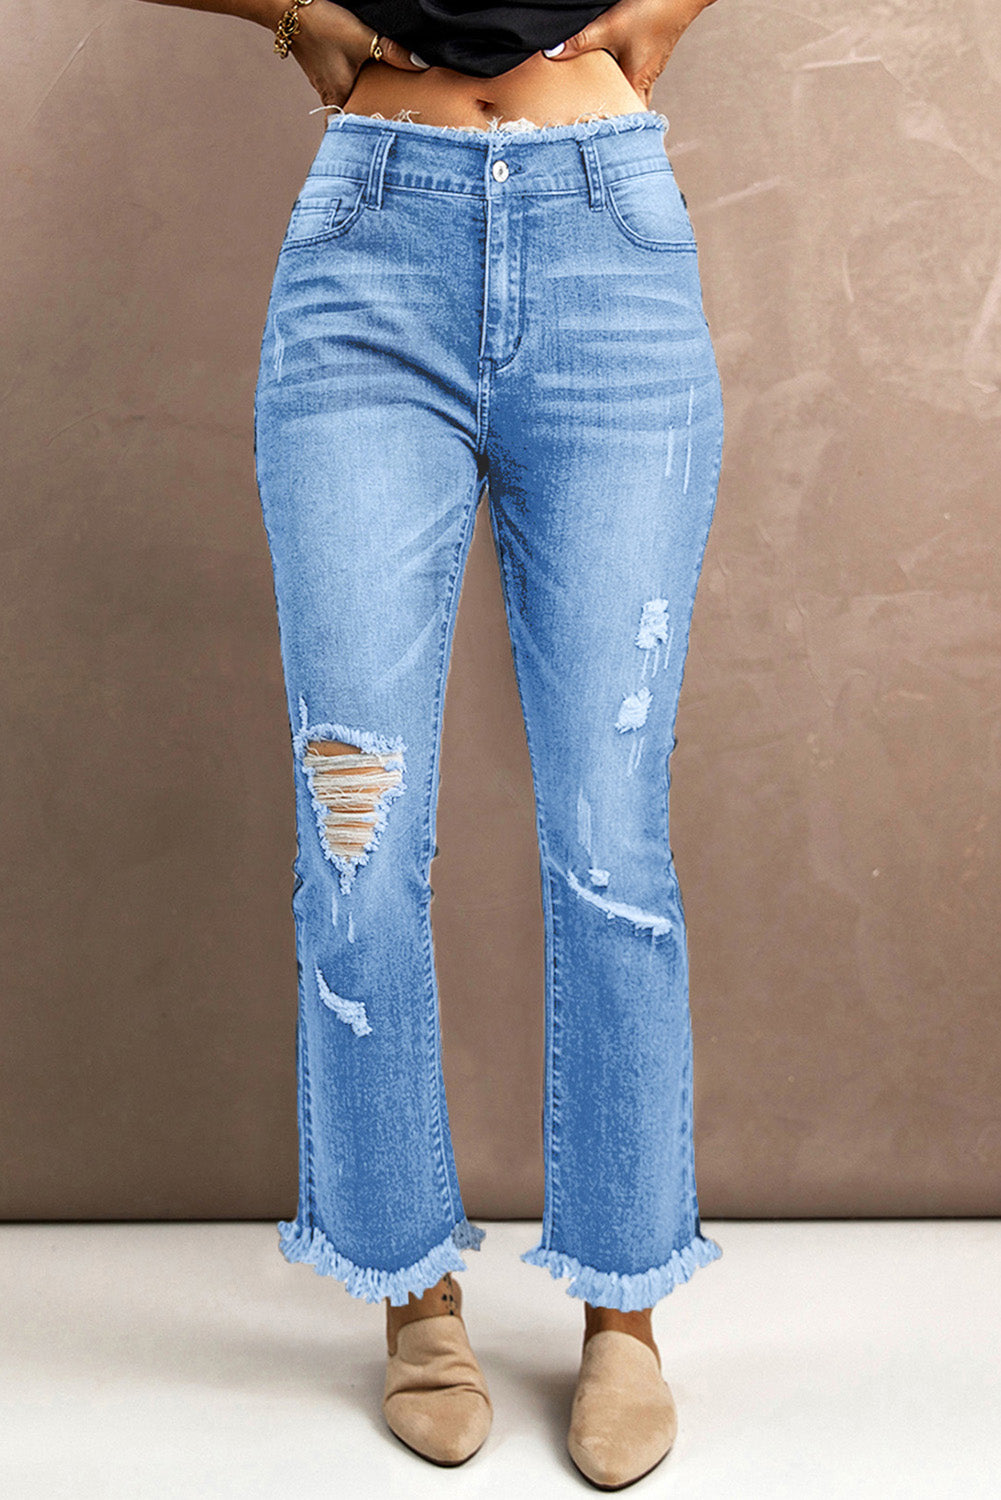 Sky Blue Frayed Ripped High Waist Flare Jeans Jeans JT's Designer Fashion